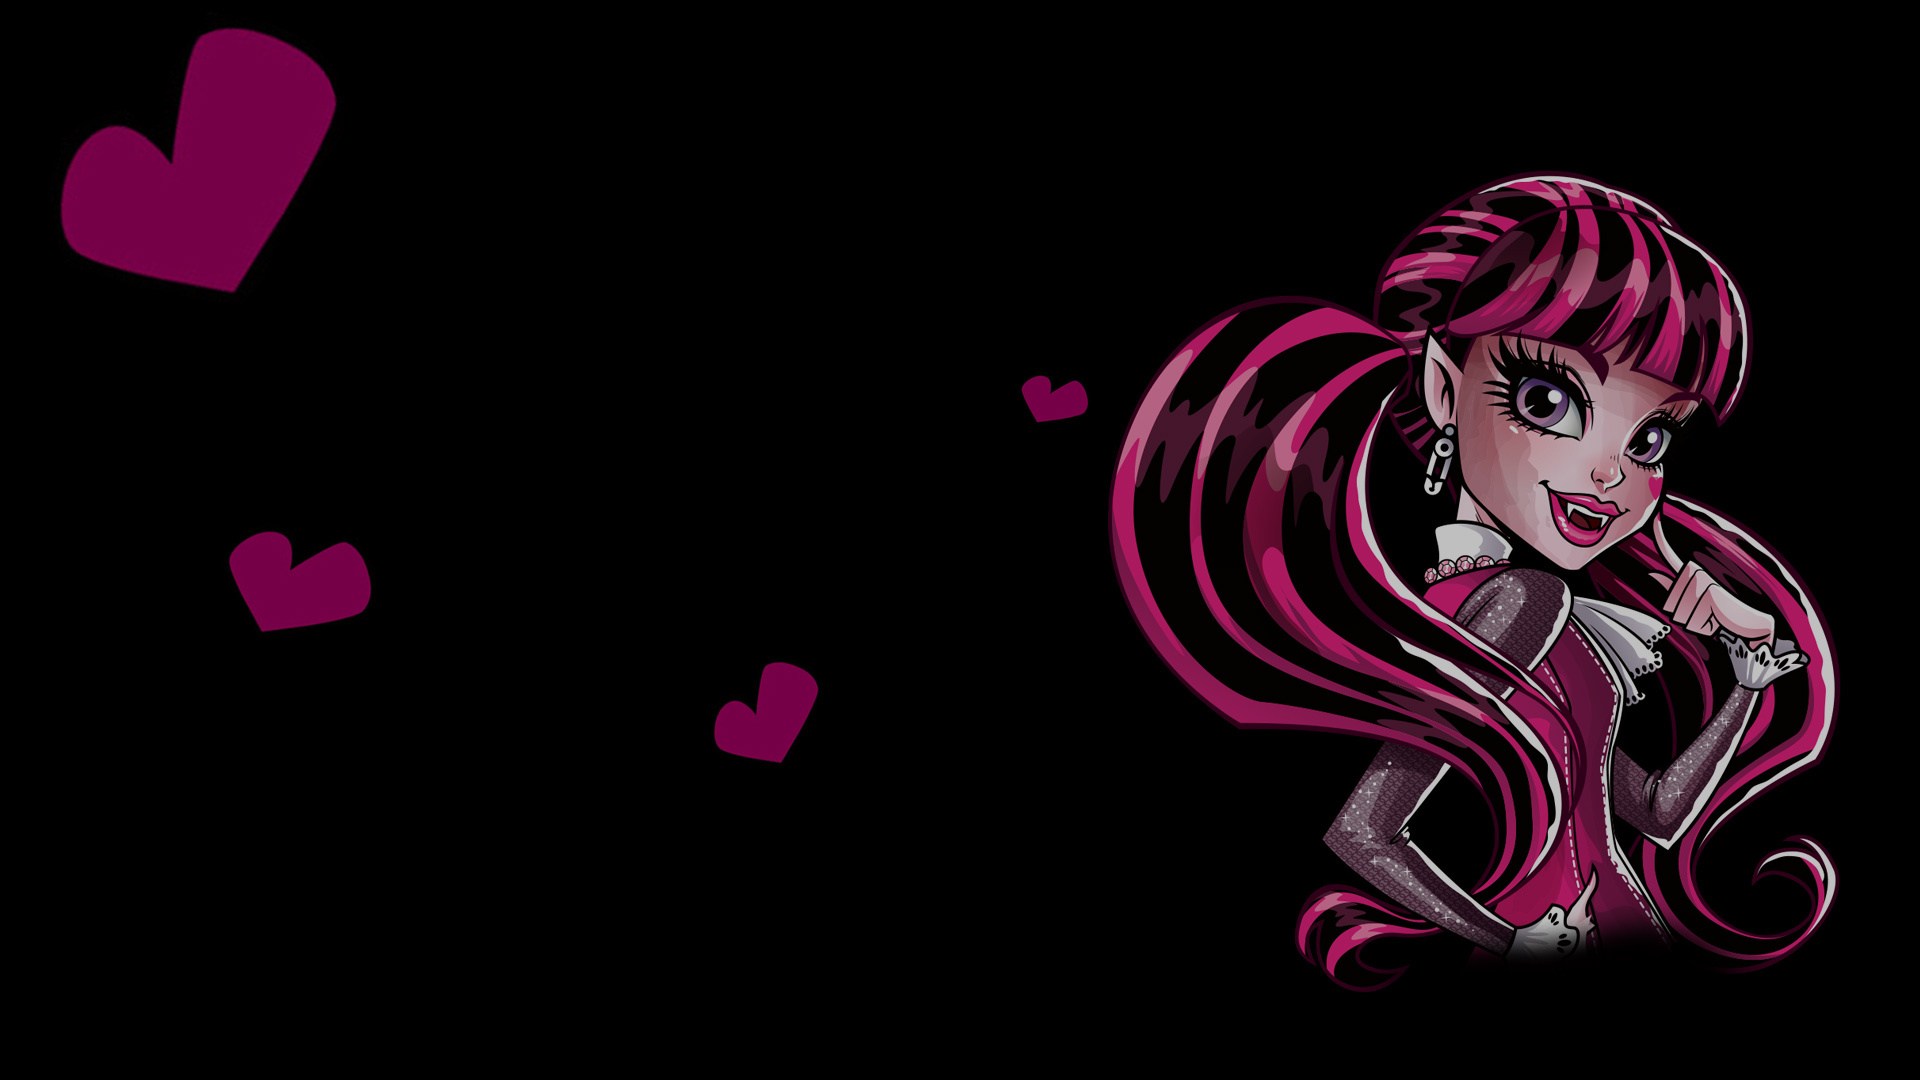 Monster High: Draculaura, Voiced by Debi Derryberry from 2010 to 2018. 1920x1080 Full HD Background.